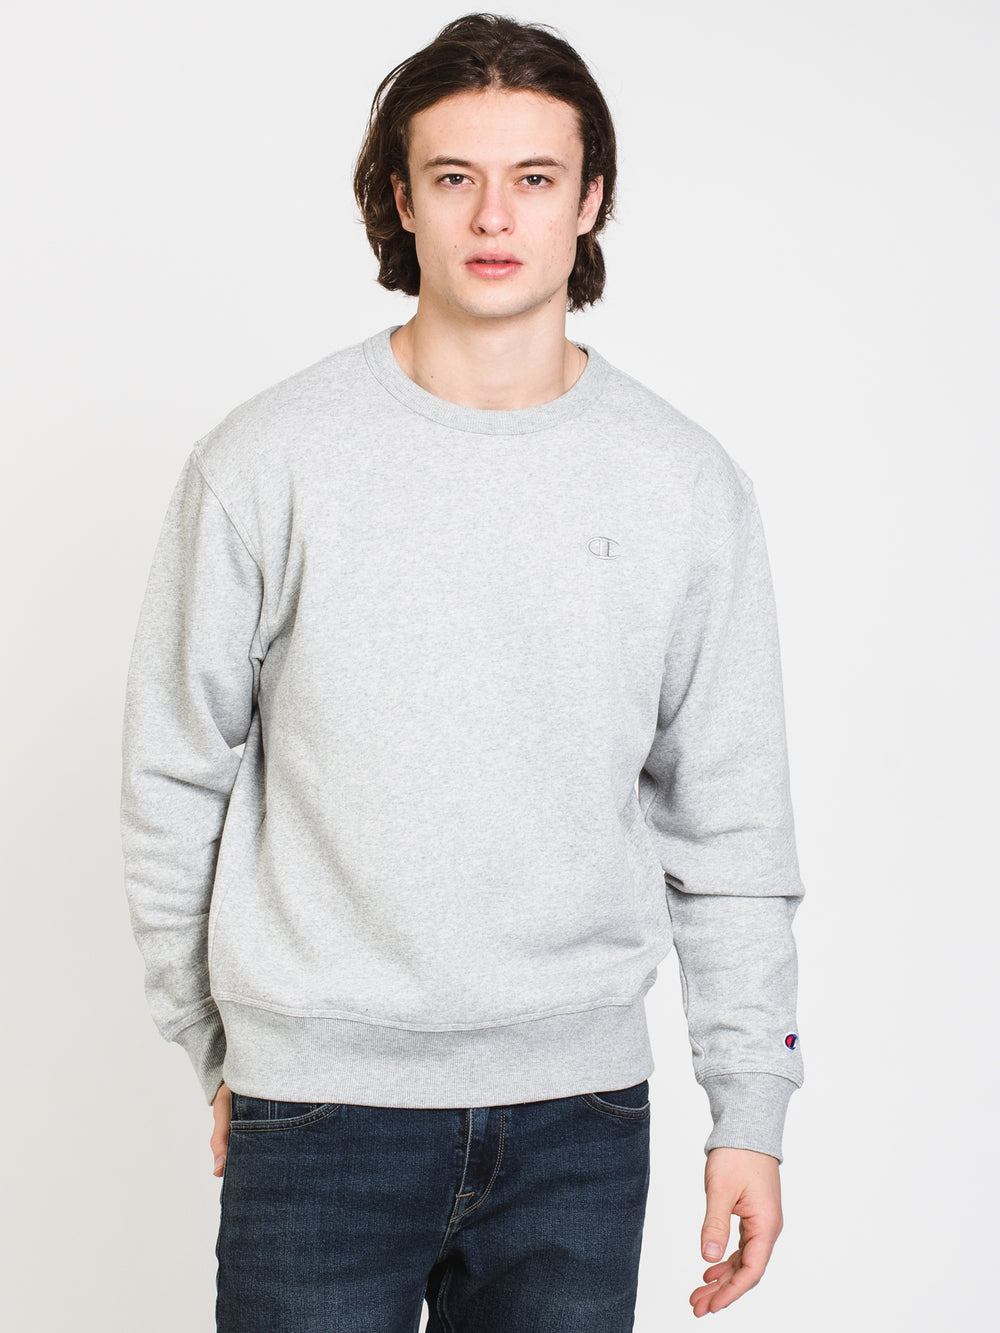 CHAMPION POWERBLEND FLEECE CREW EMBROIDERED C - CLEARANCE